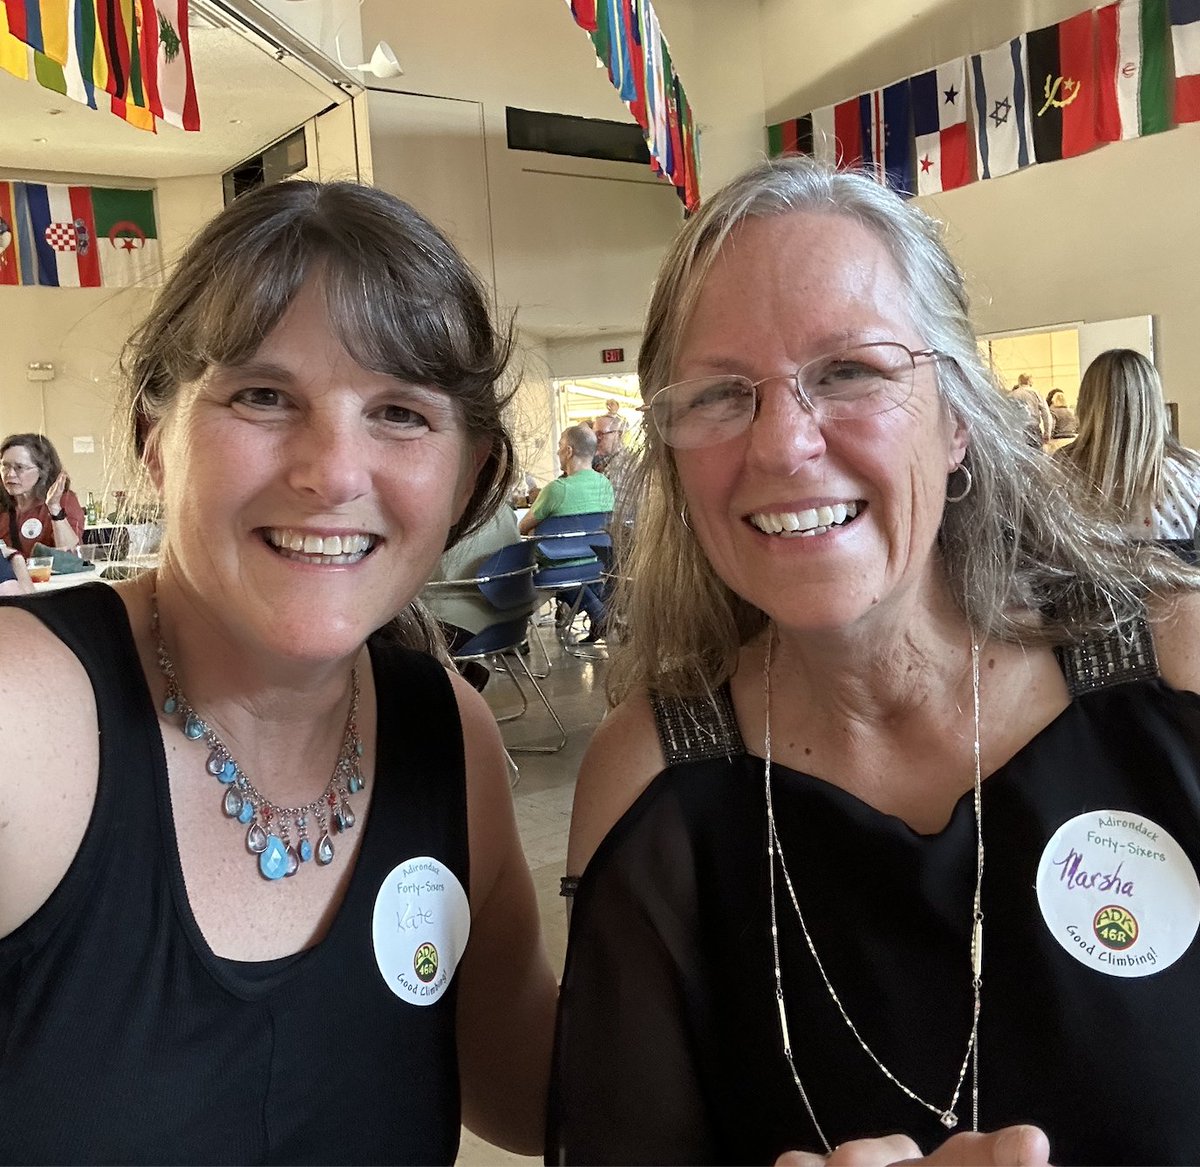 I became an Adirondack 46er when I summited Whiteface Mountain, all muddy and sweaty, last September, but last night's annual meeting of the group made it official! It was so much fun to celebrate with my friend & hiking partner Marsha Trombly!